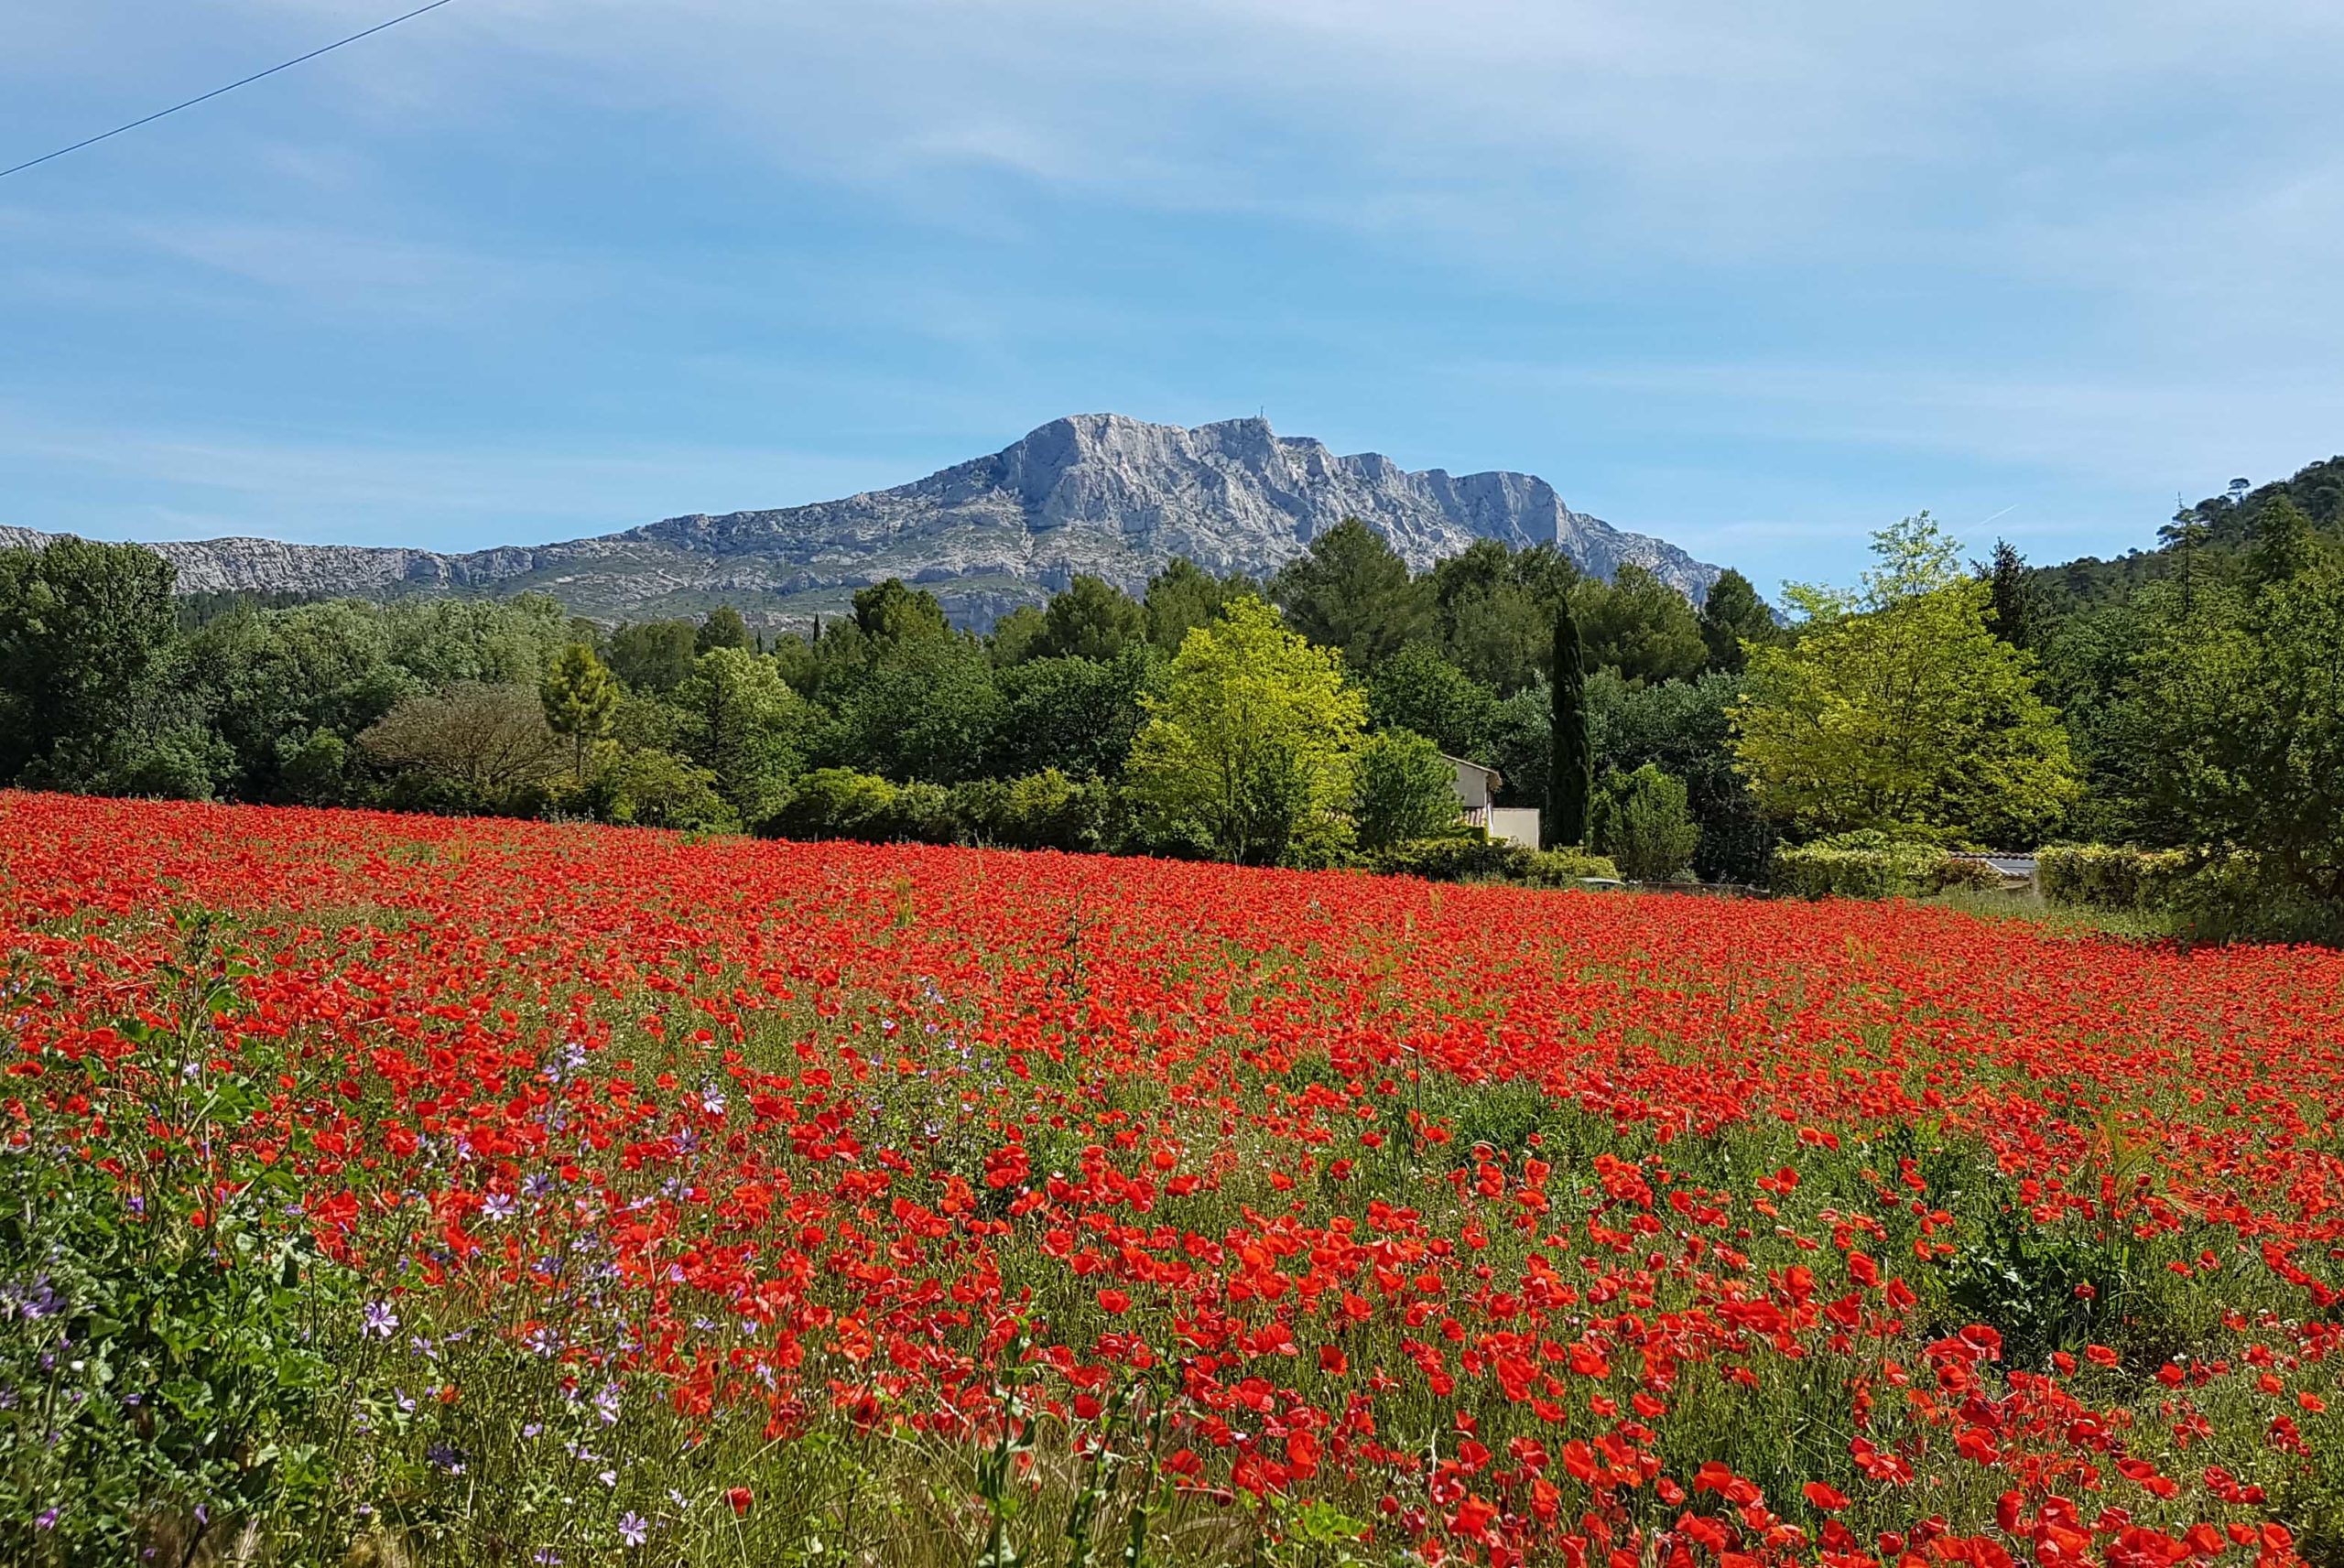 Montagne Sainte-Victoire from Beaurecueil © Mathieu BROSSAIS - licence [CC BY-SA 4.0] from Wikimedia Commons